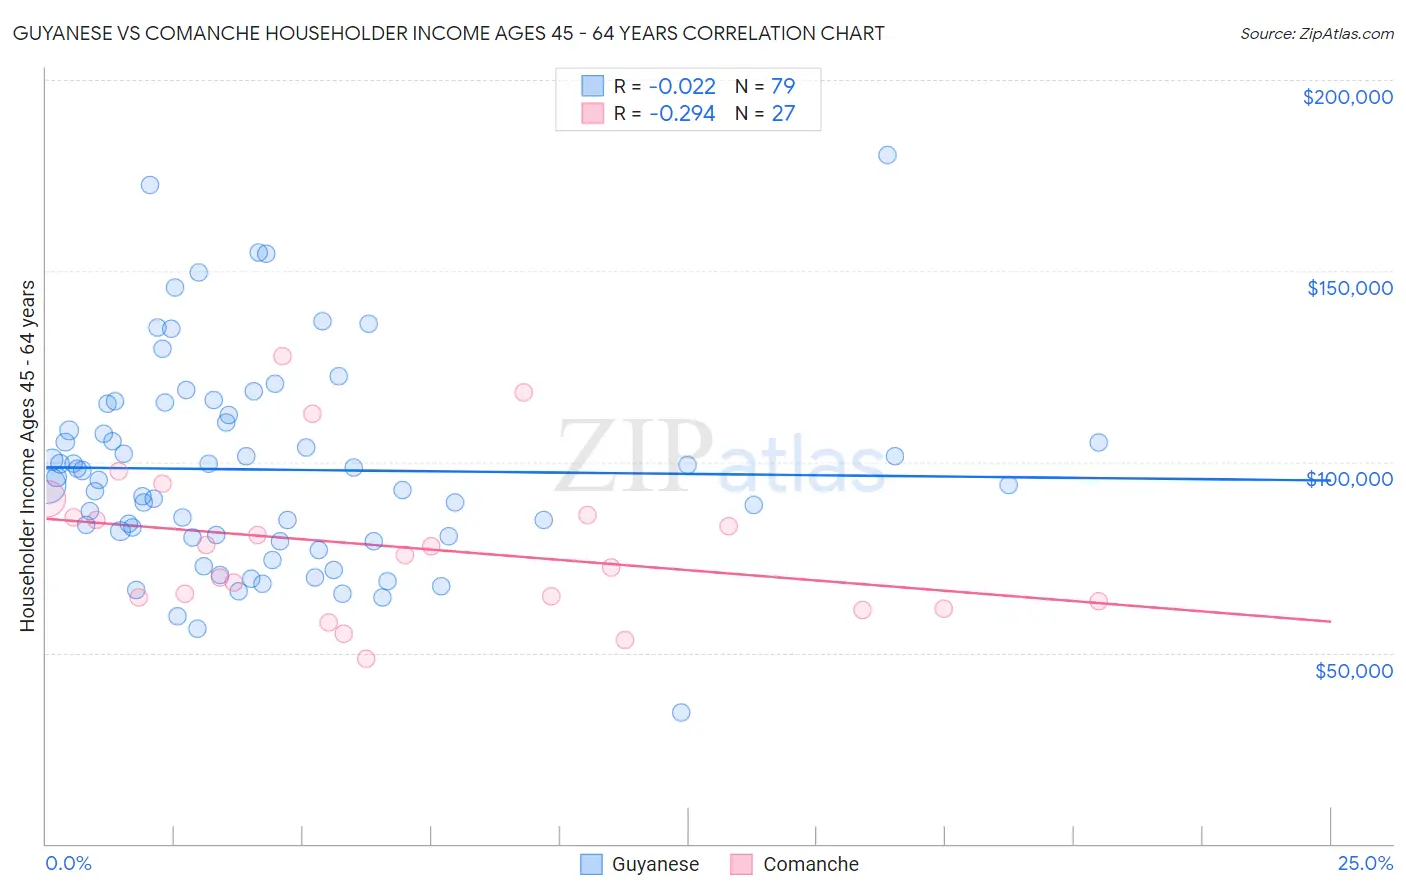 Guyanese vs Comanche Householder Income Ages 45 - 64 years